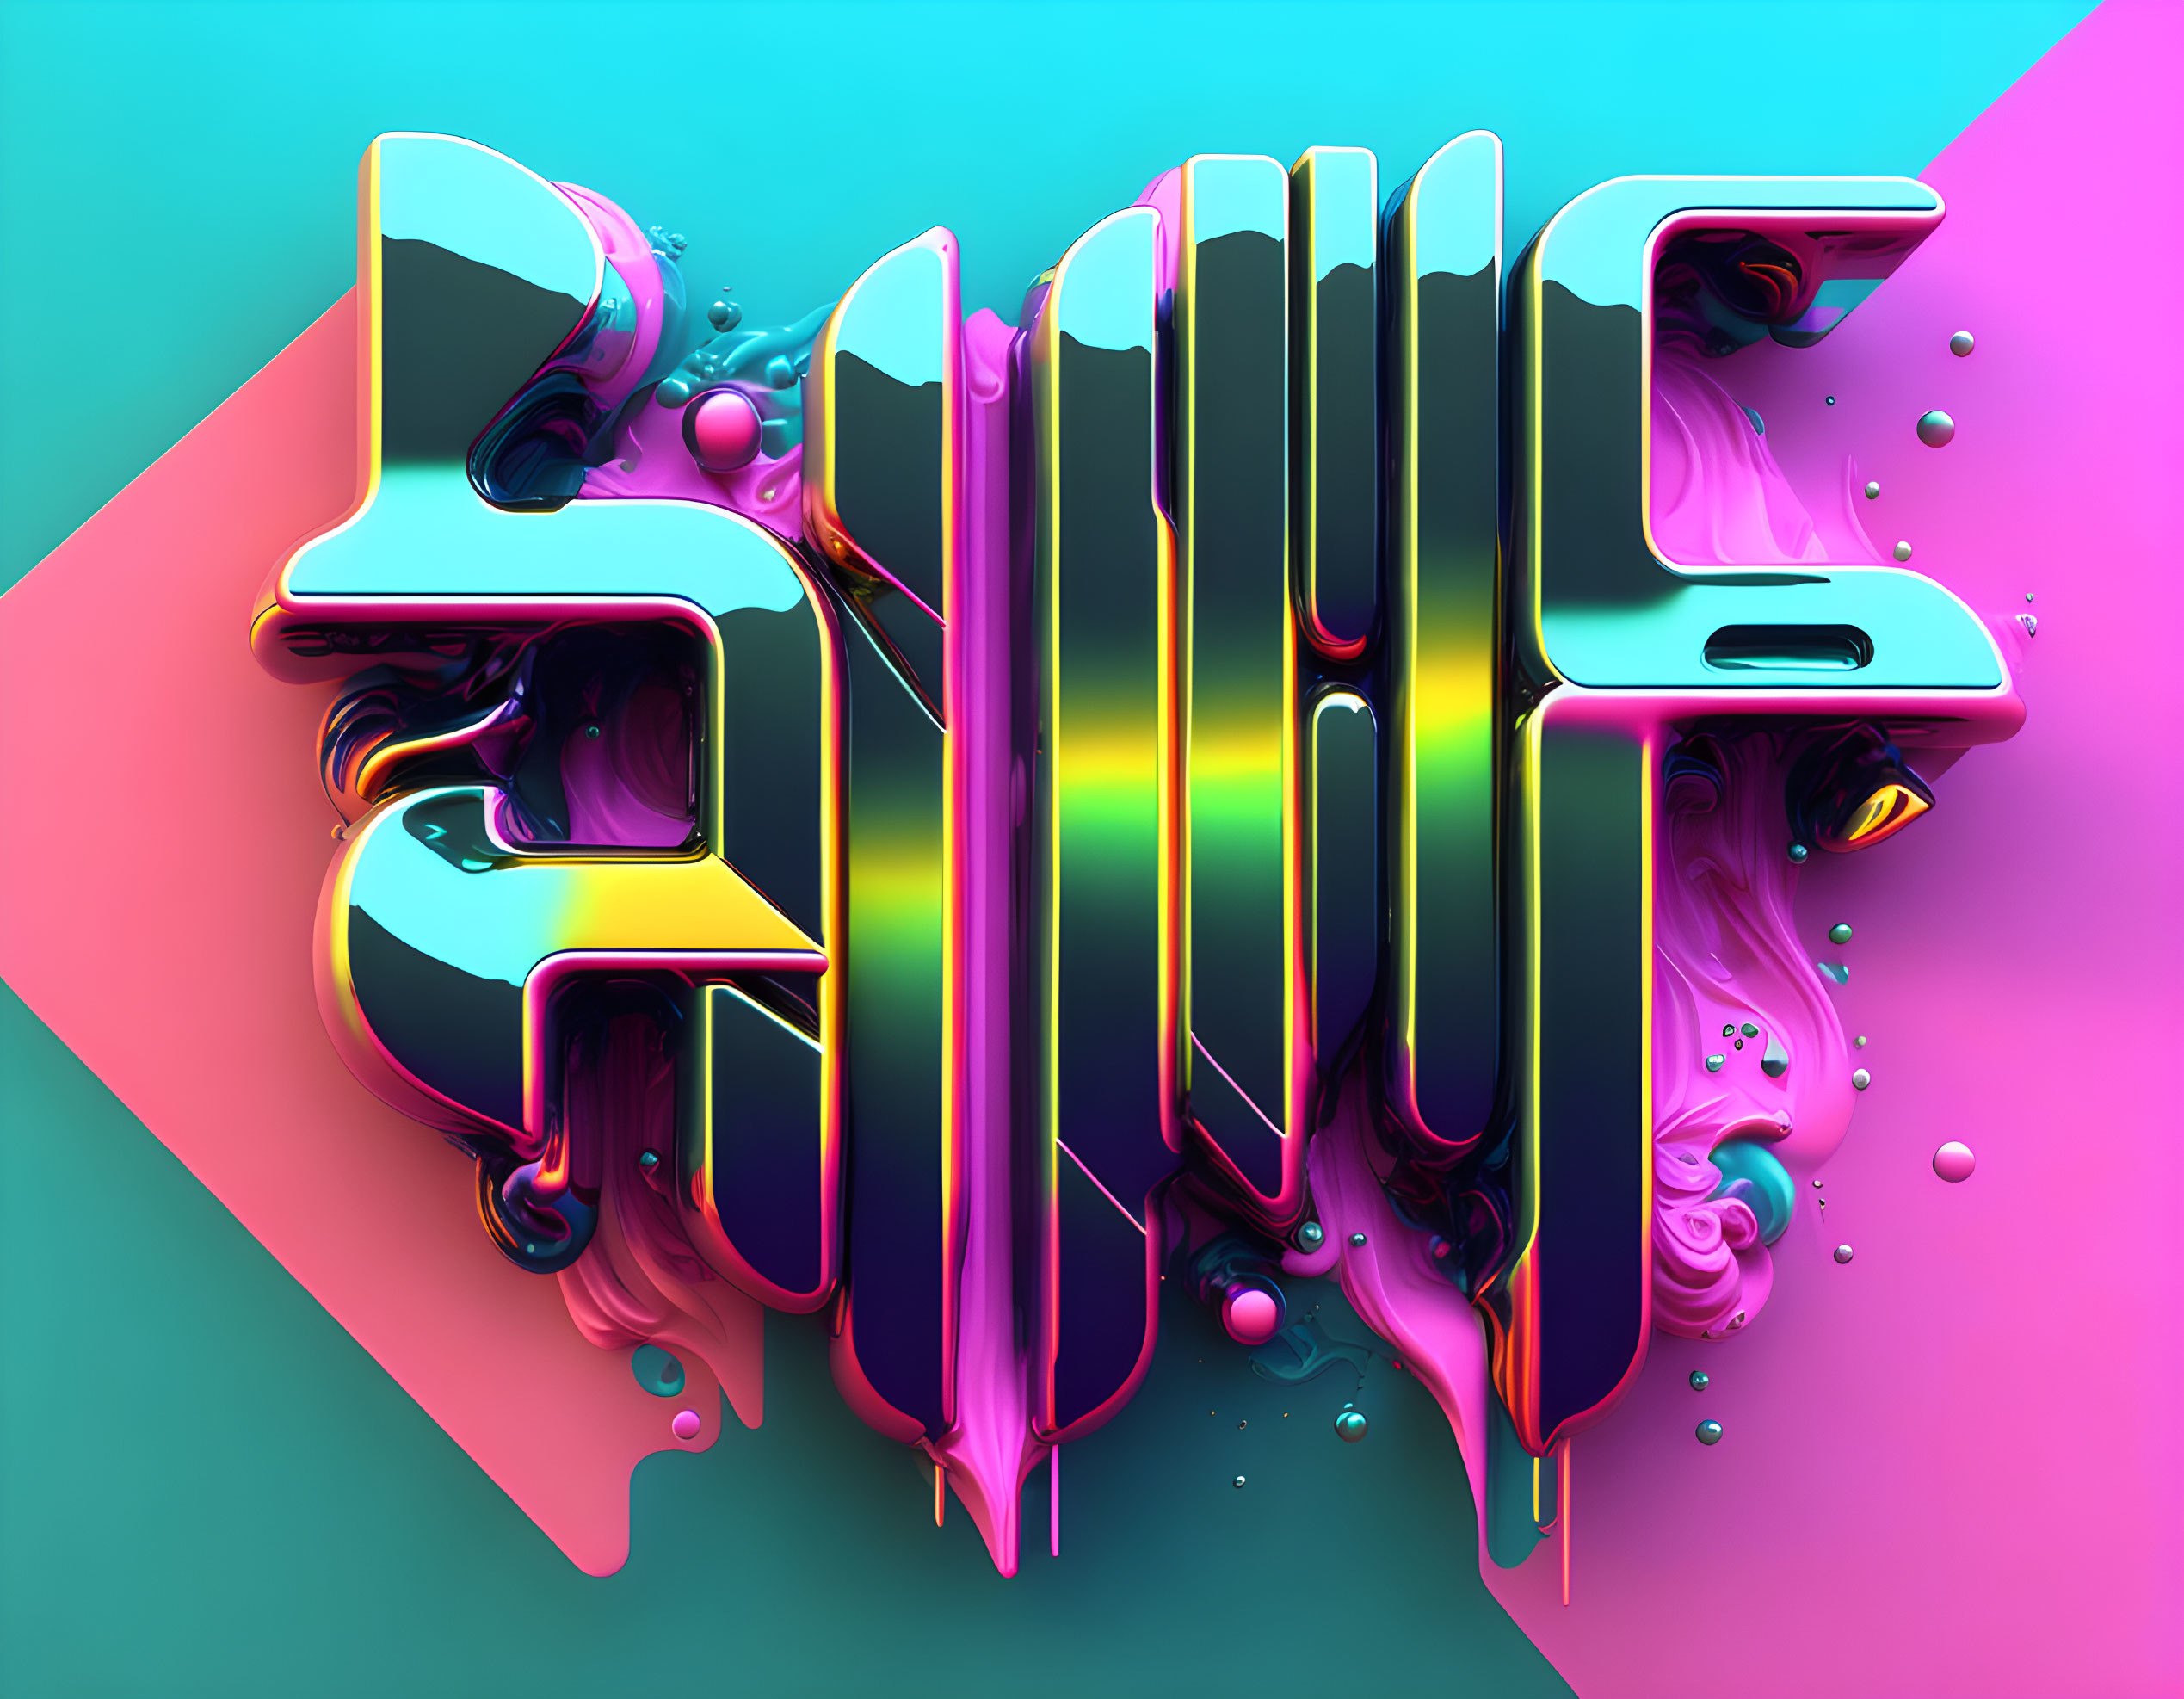 Colorful 3D "SHINE" text on split pink and turquoise background